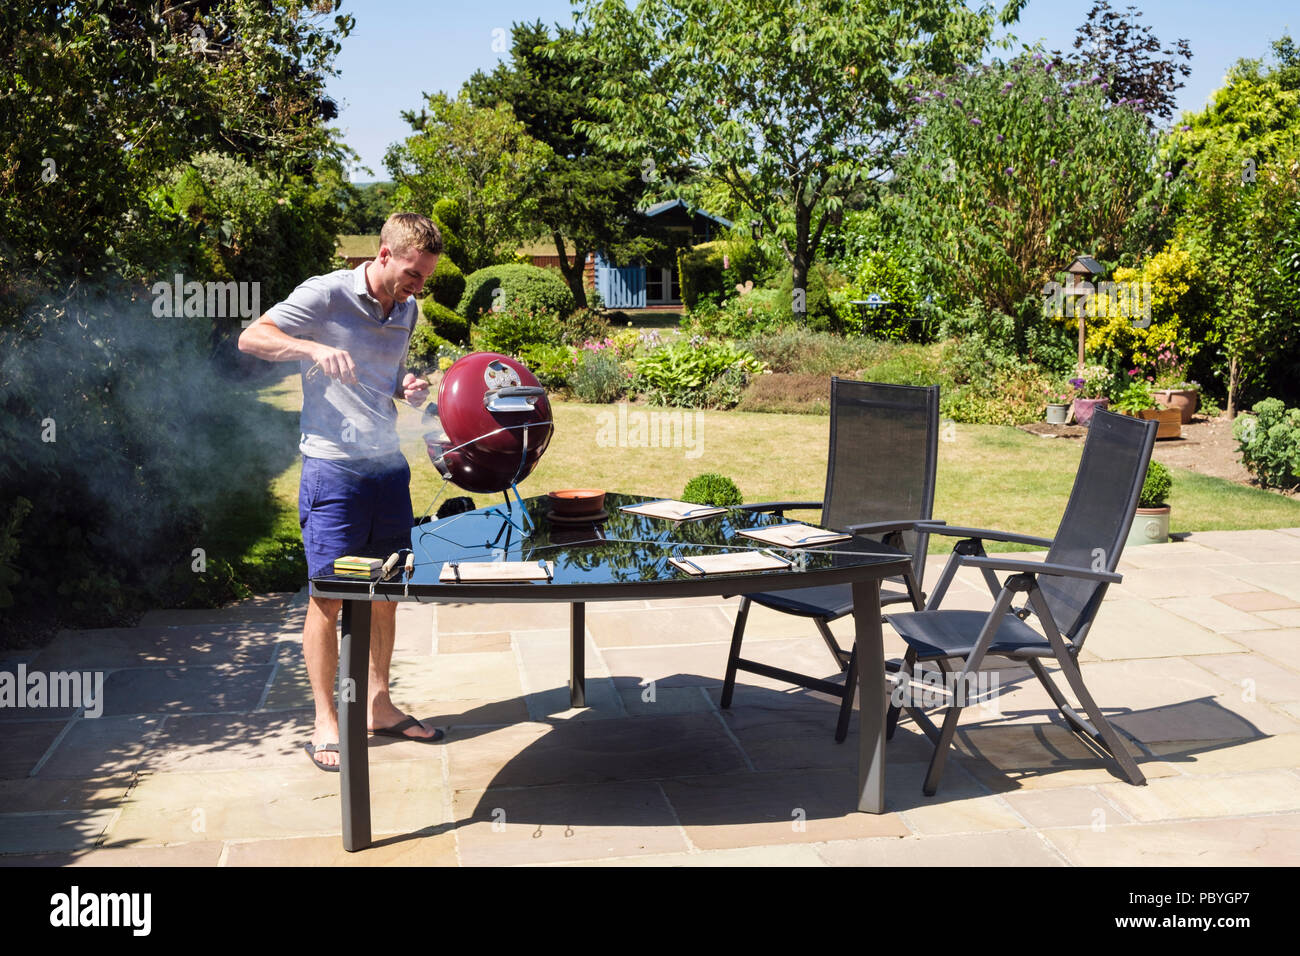 Authentic image of a Millennial young man cooking on a BBQ on a patio backyard garden table in a hot summer season of 2018. England, UK, Britain Stock Photo